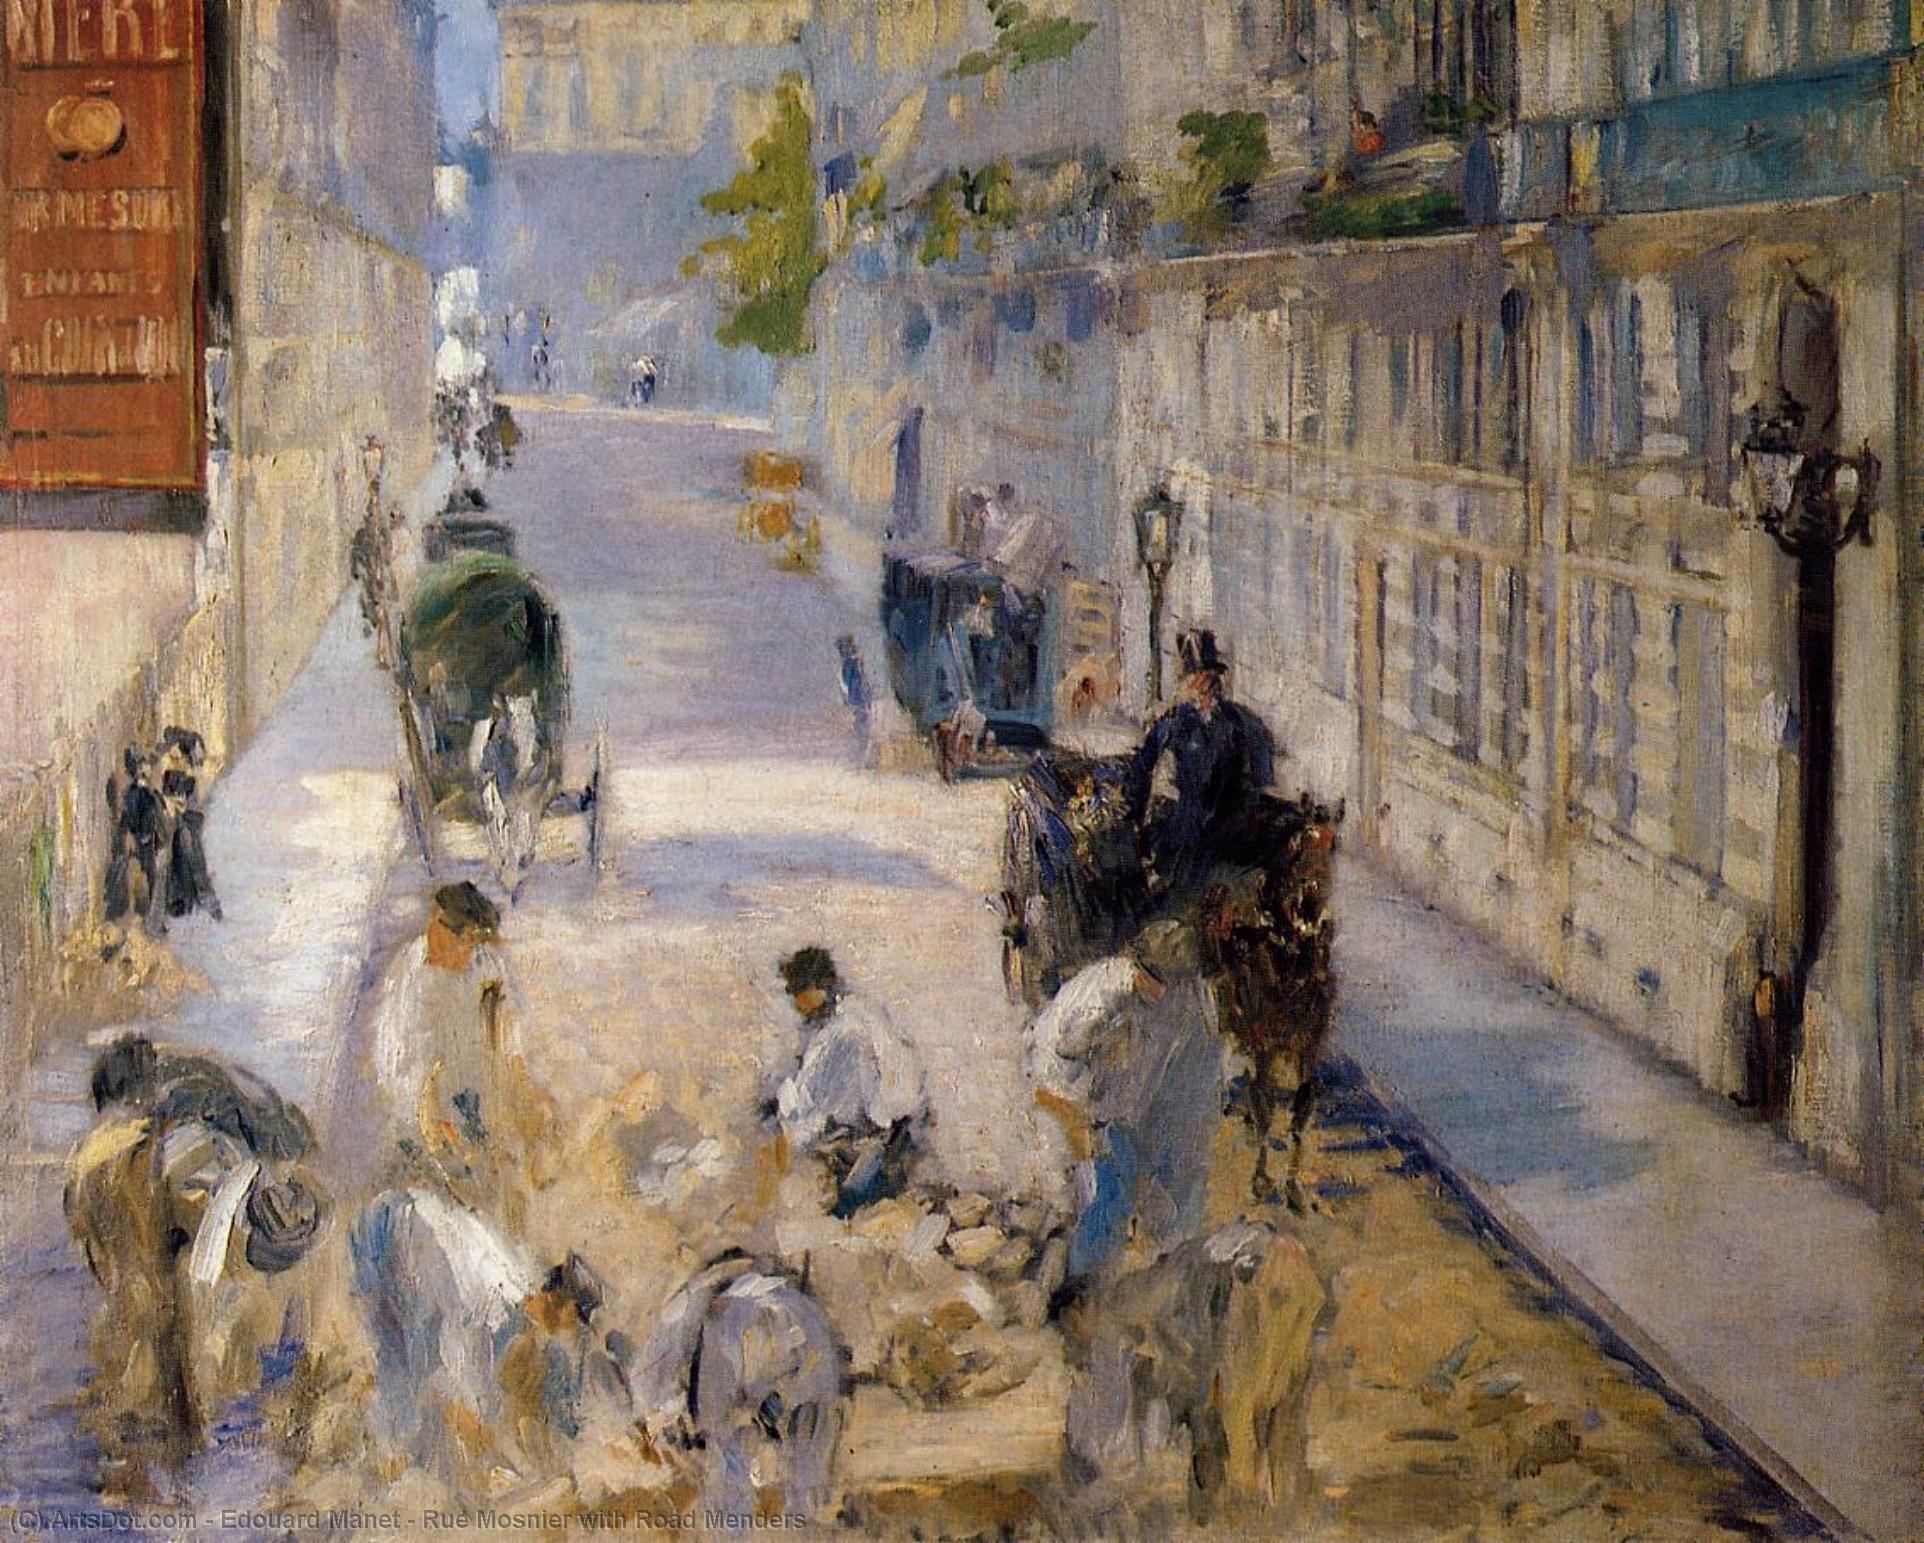 WikiOO.org - Encyclopedia of Fine Arts - Maalaus, taideteos Edouard Manet - Rue Mosnier with Road Menders